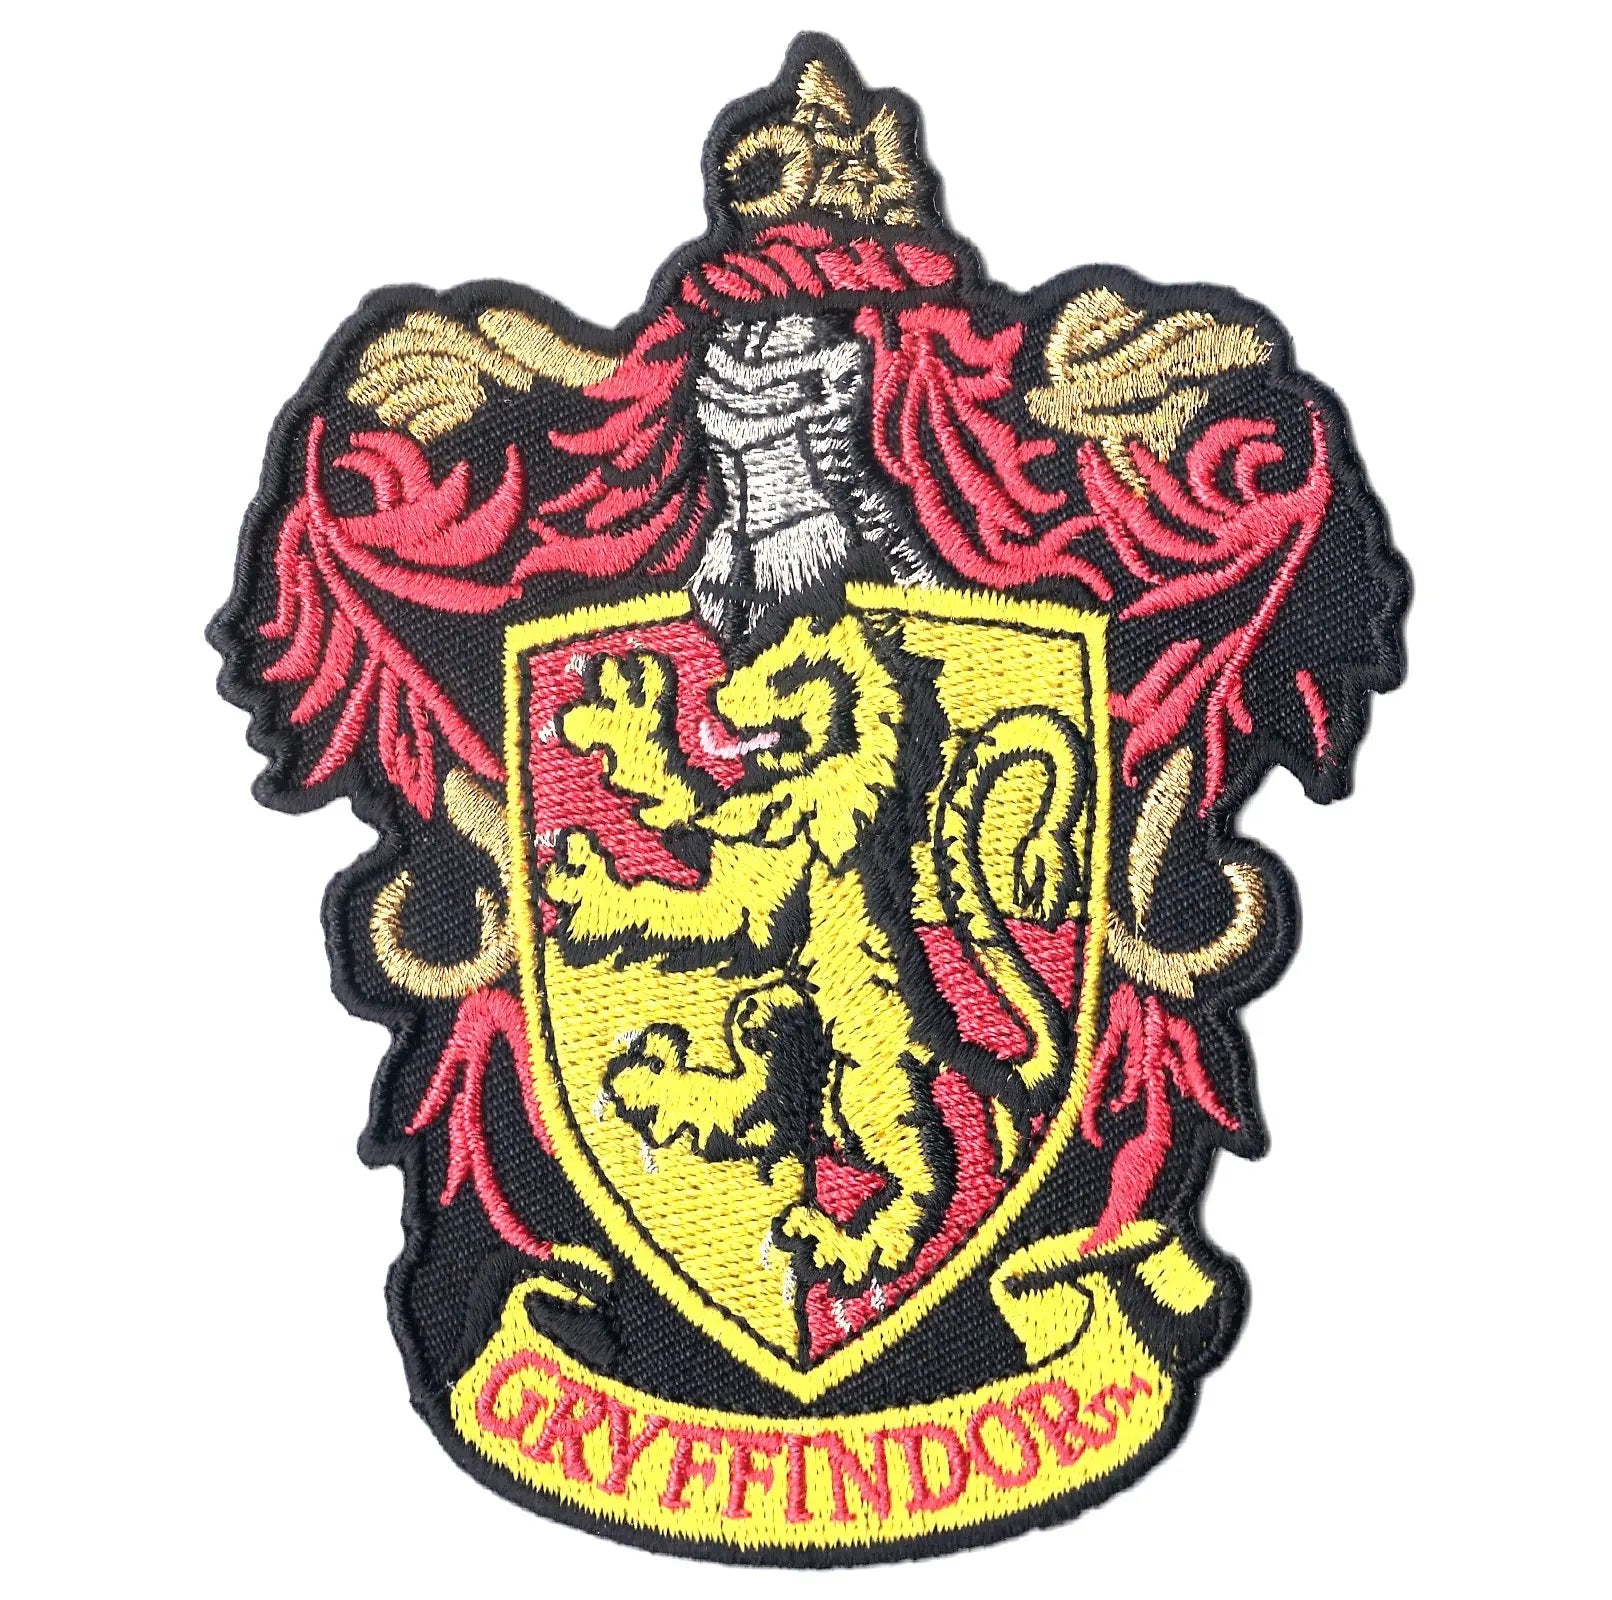 Harry Potter Gryffindor Crest Embroidered Iron On Patch